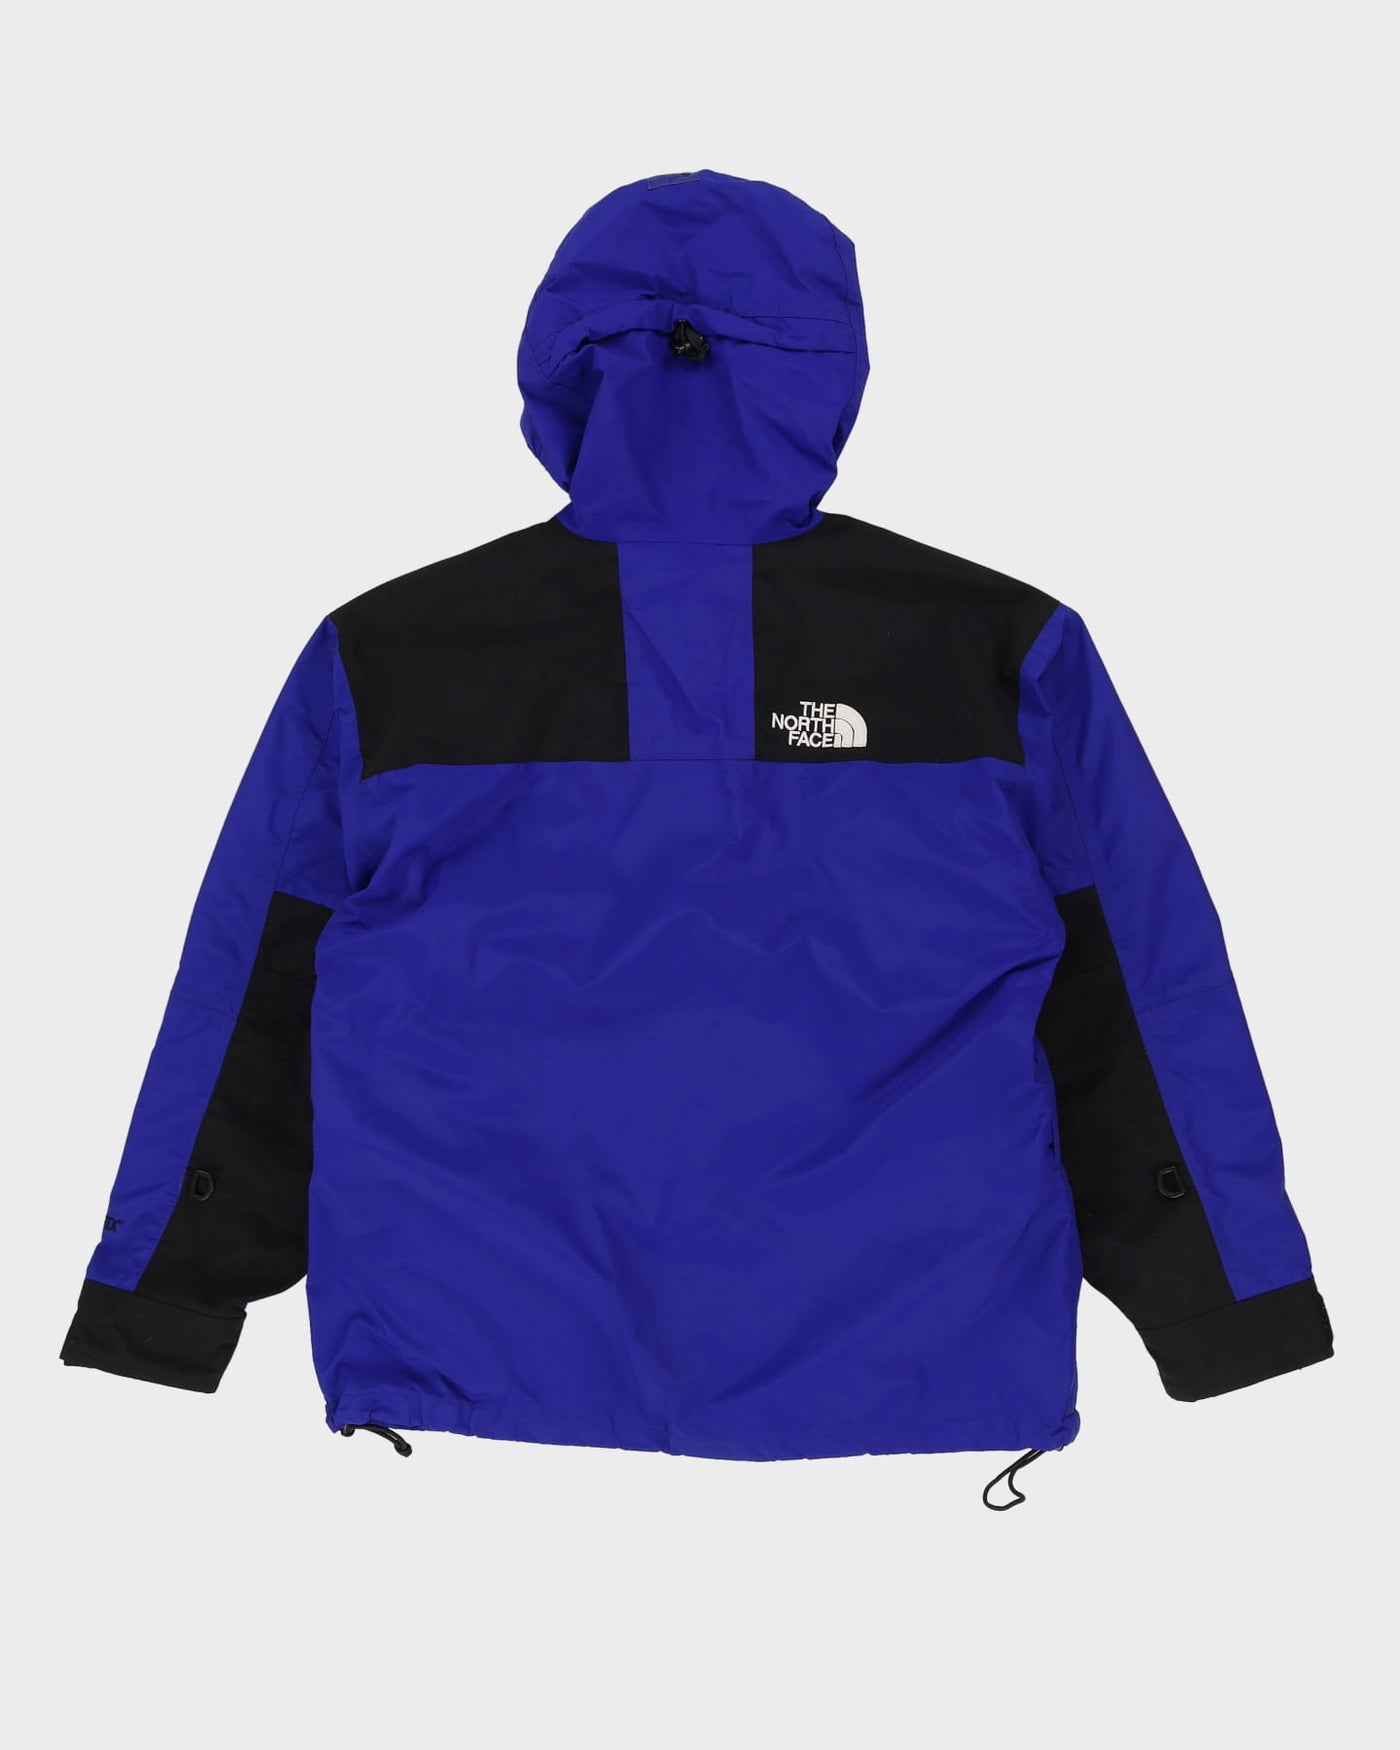 Vintage 90s The North Face Blue Hooded Anorak Jacket - L